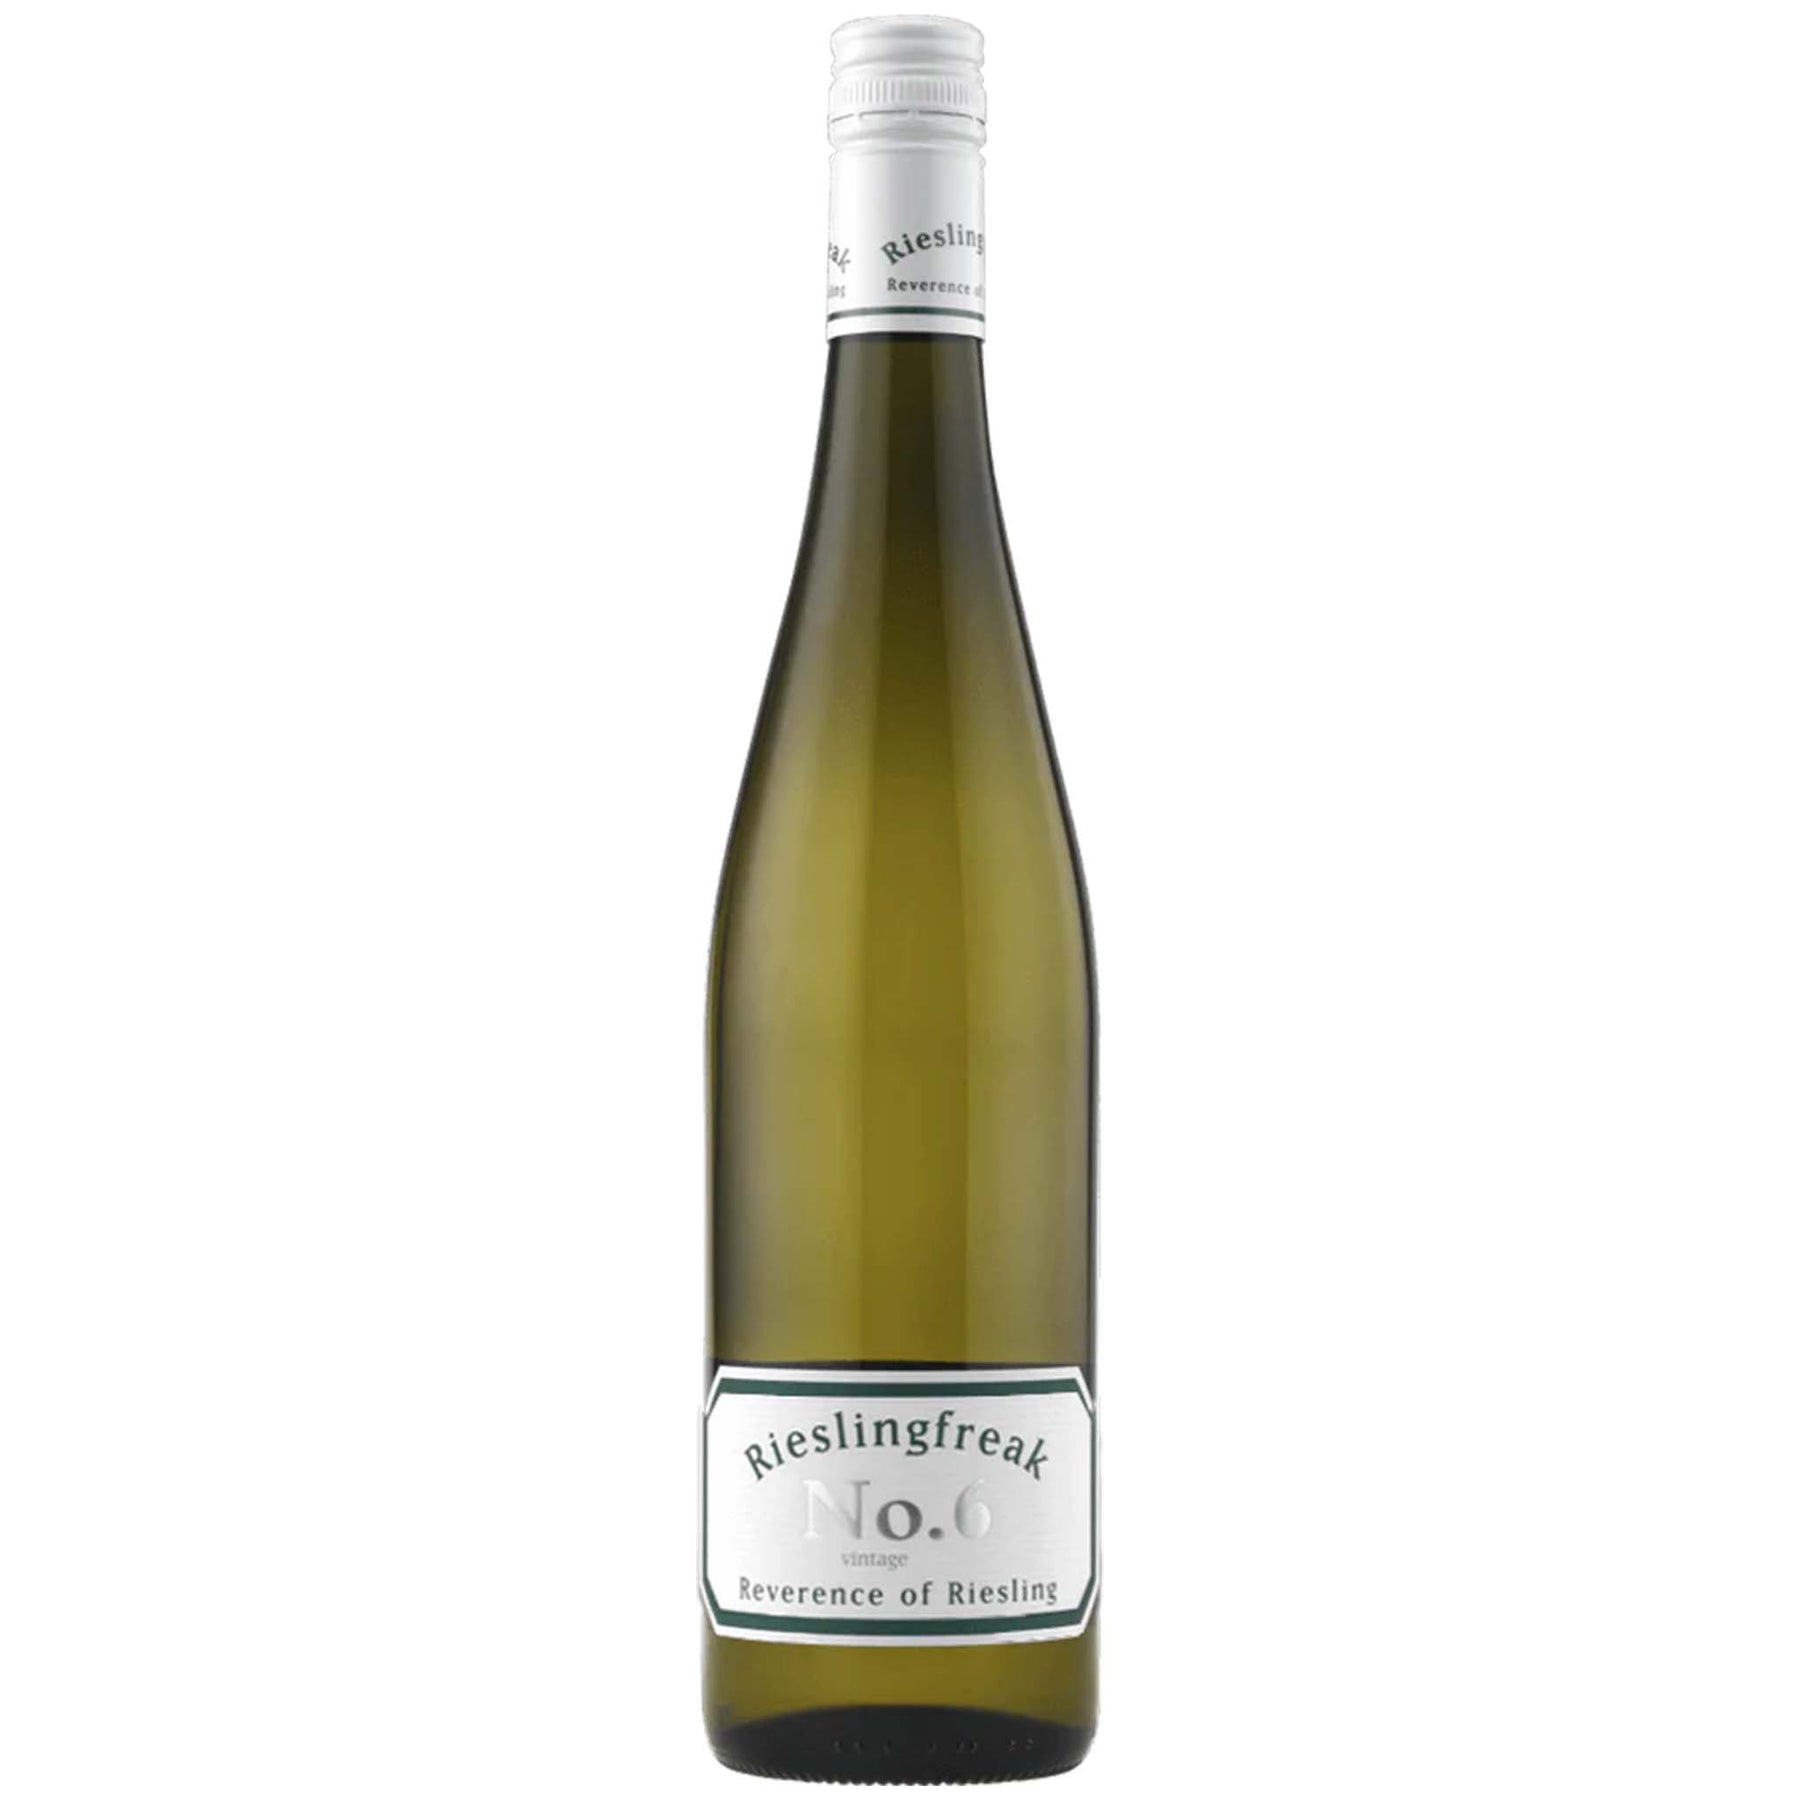 Rieslingfreak-No-6-Clare-Valley-Aged-Release-Riesling-2015